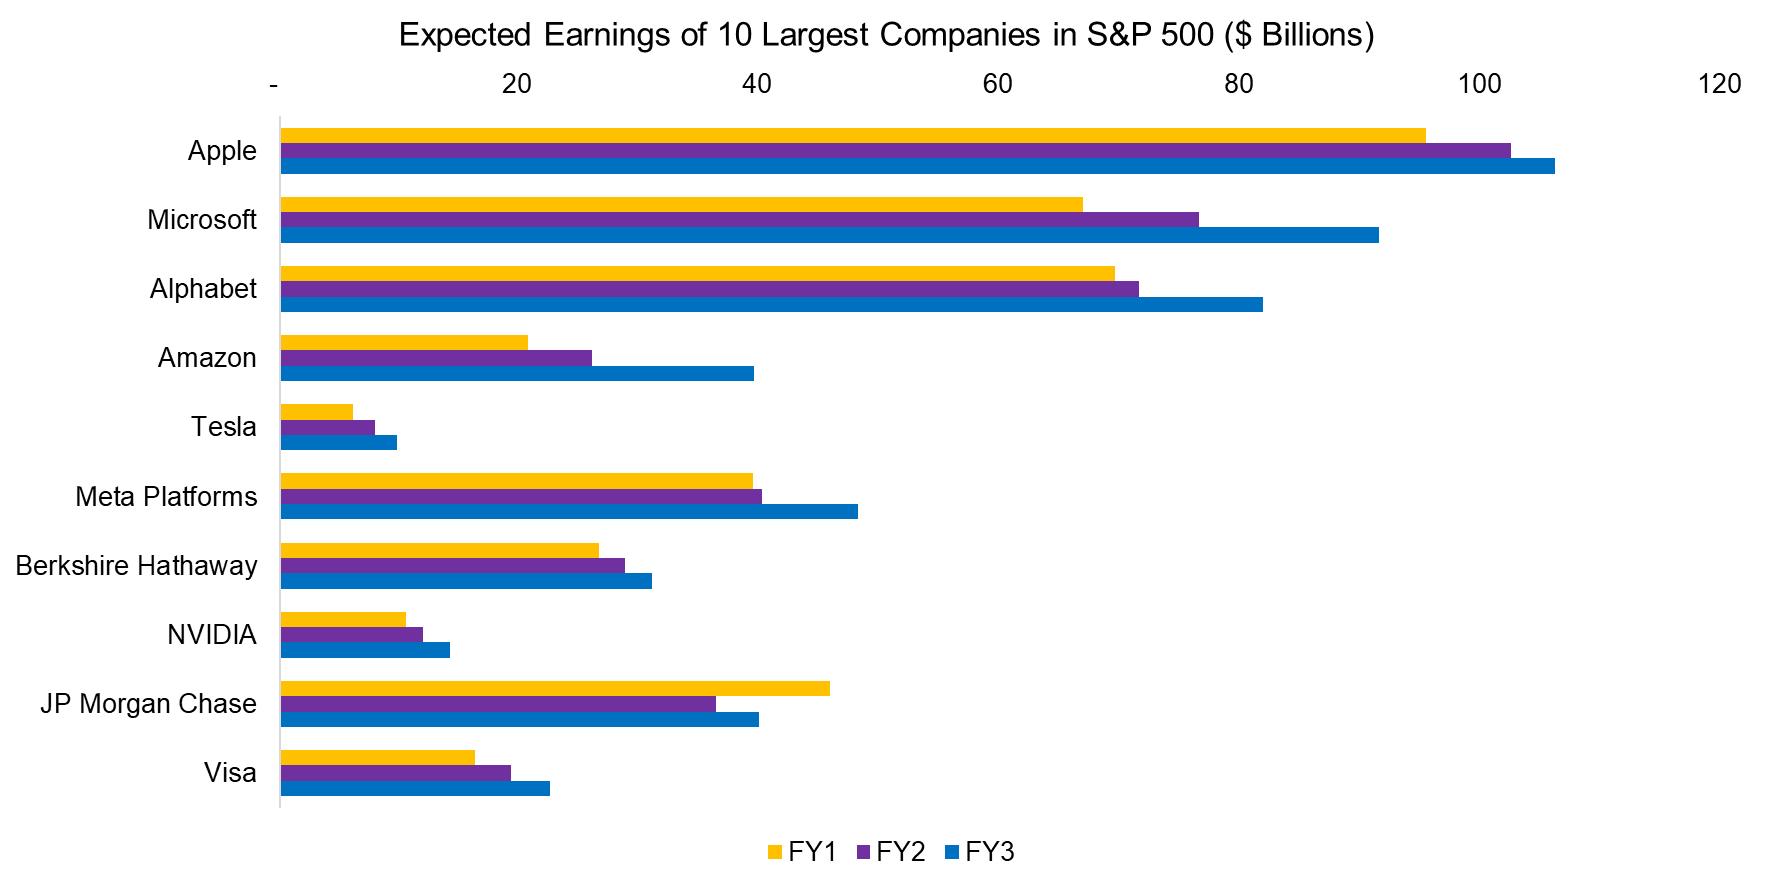 Expected Earnings of 10 Largest Companies in S&P 500 ($ Billions)